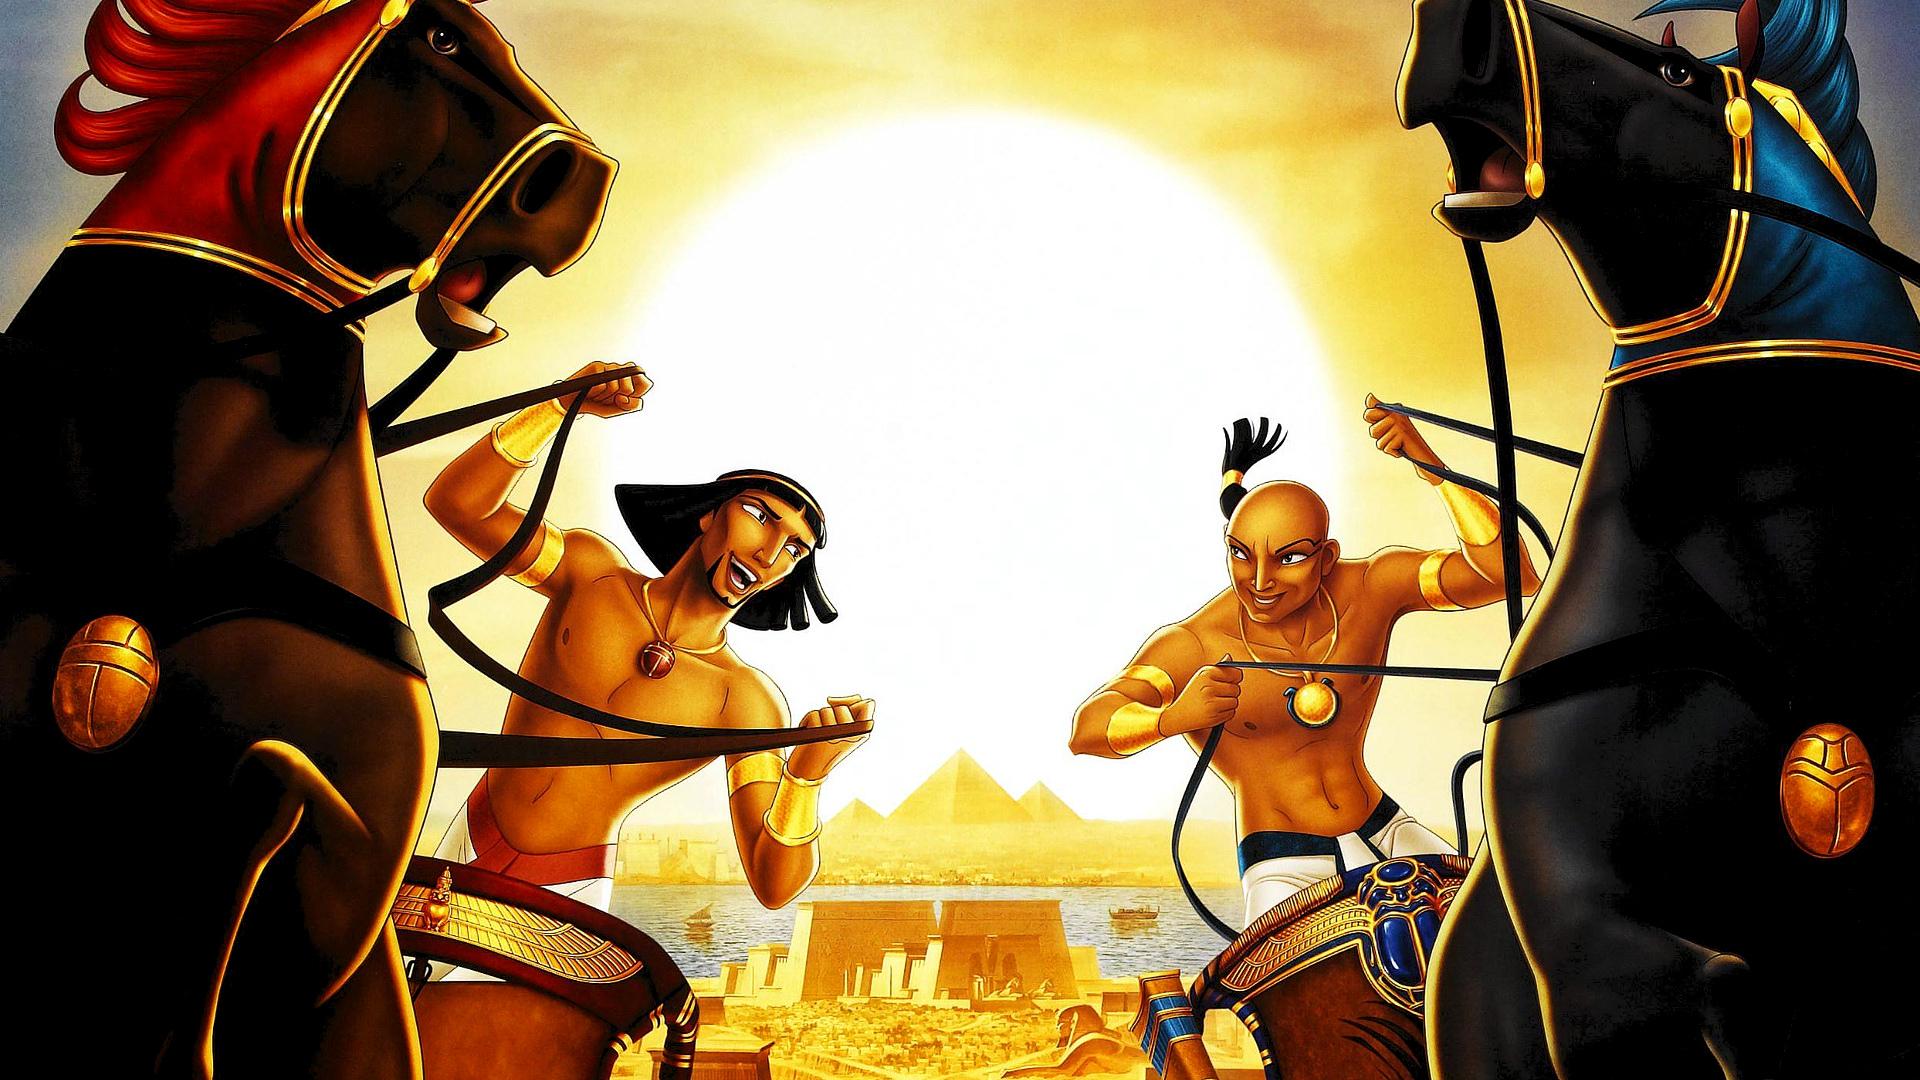 The Prince Of Egypt HD Wallpaper. Background Image